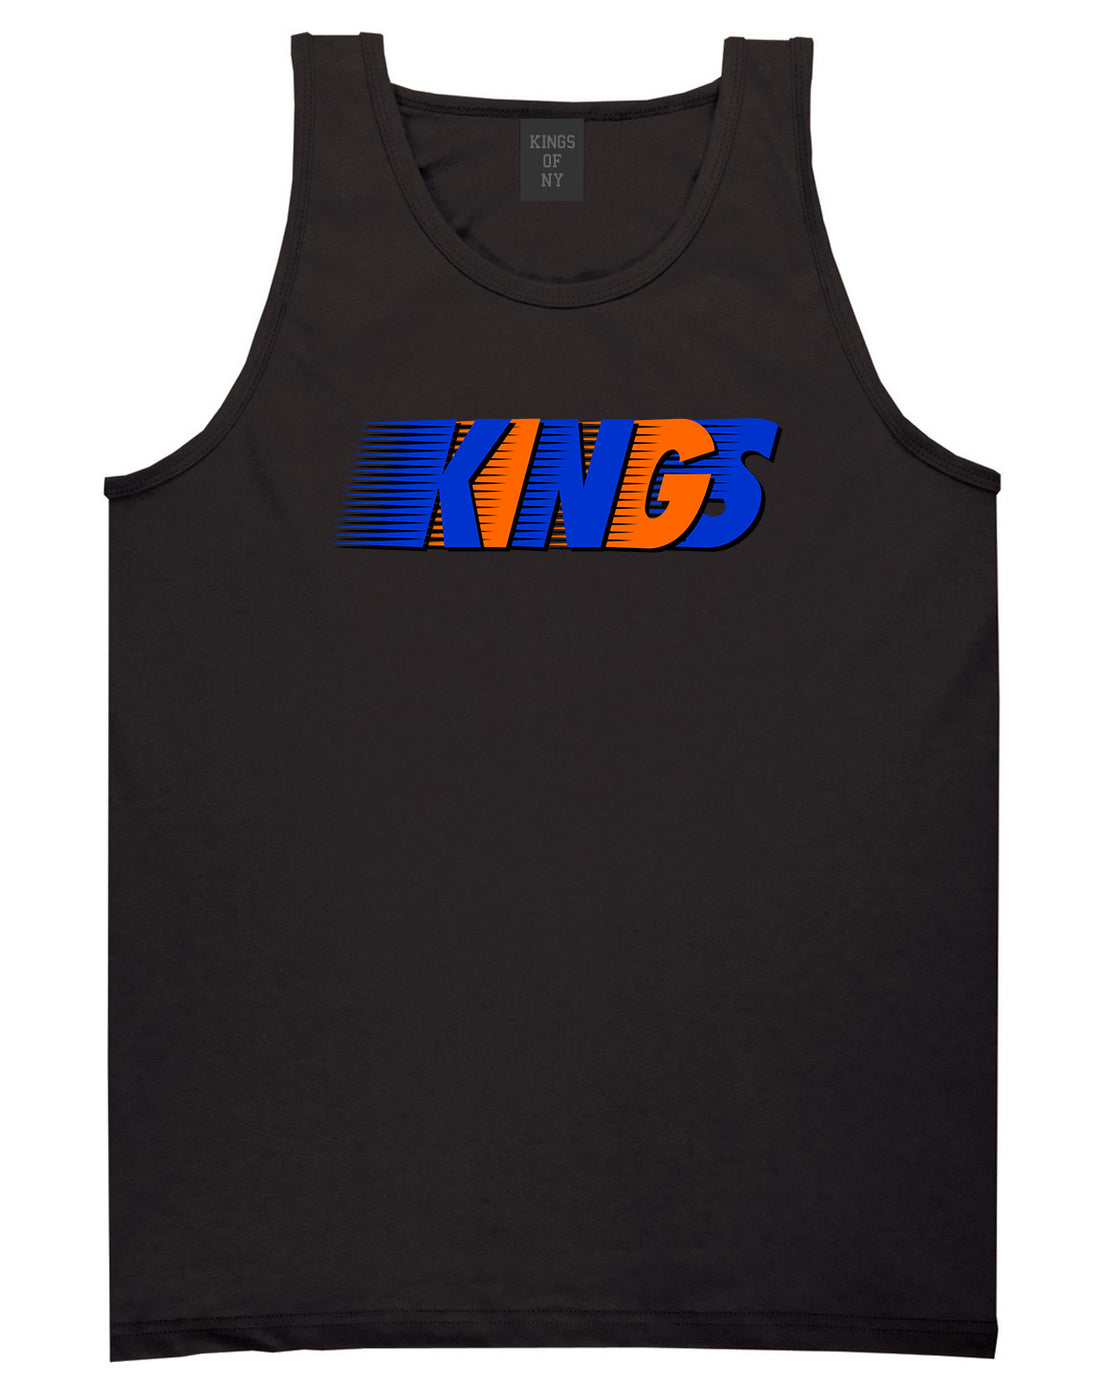 KINGS NY Colors T-Shirt in Black